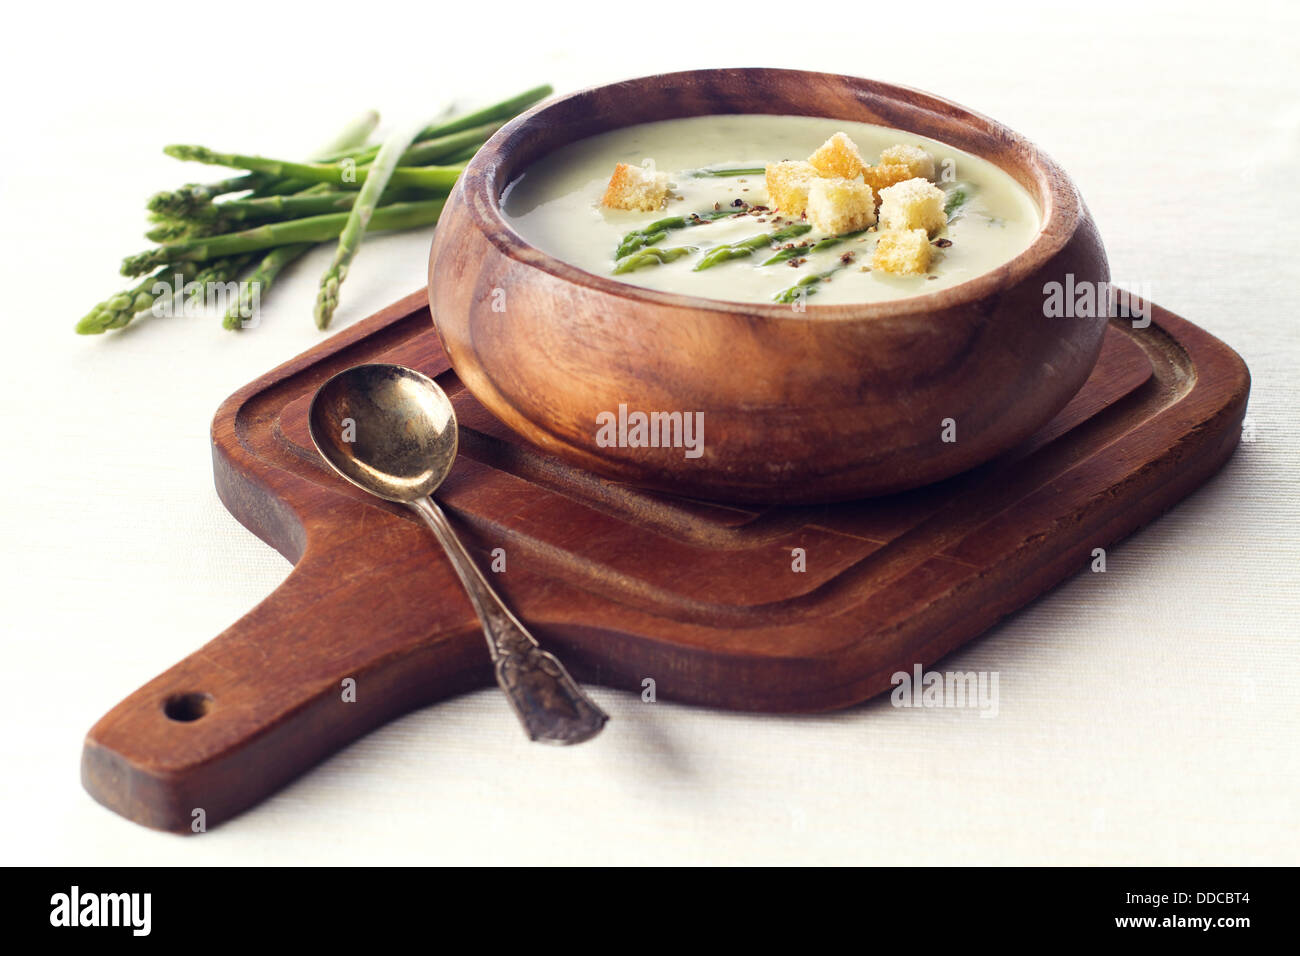 Asparagus soup cream with croutons on white background Stock Photo